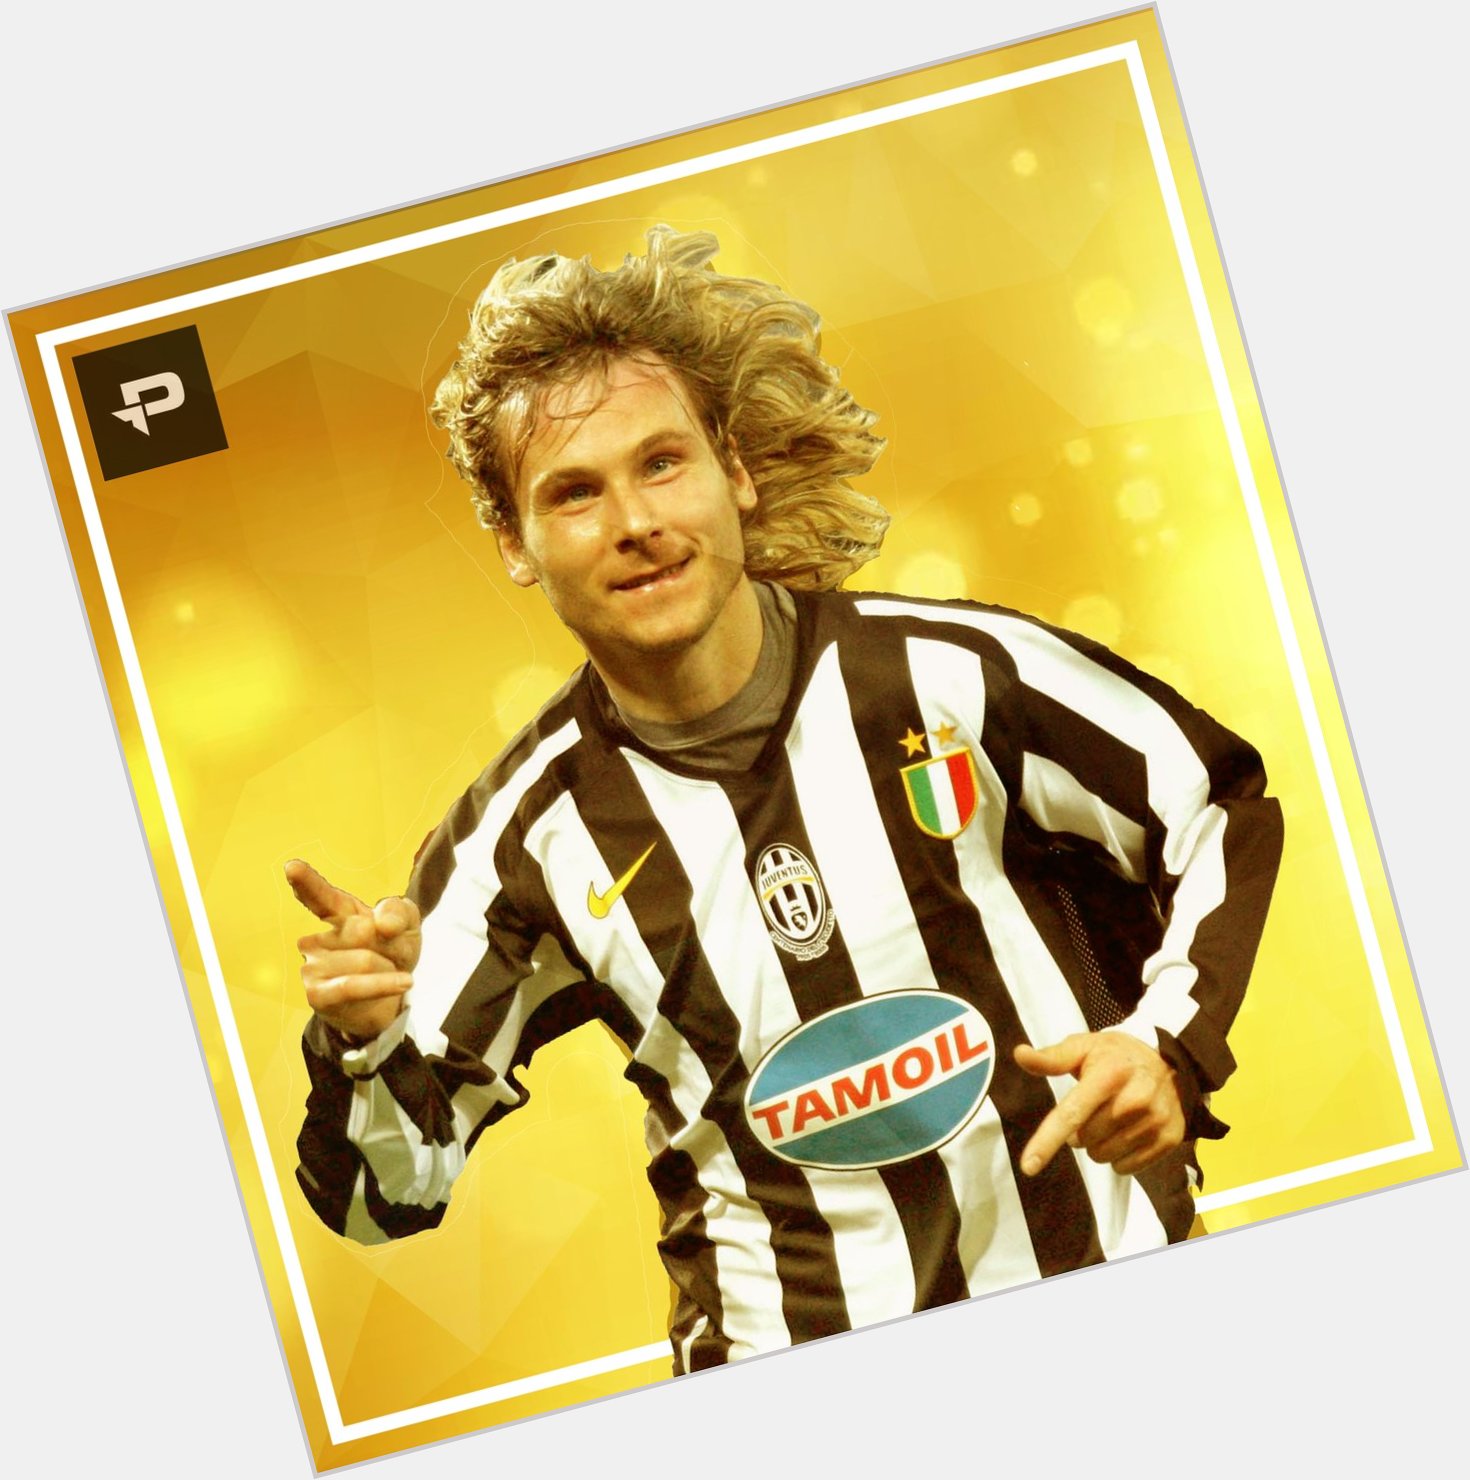 Happy Birthday to the Czech cannon Pavel Nedvêd, what a sensational player this man was. 